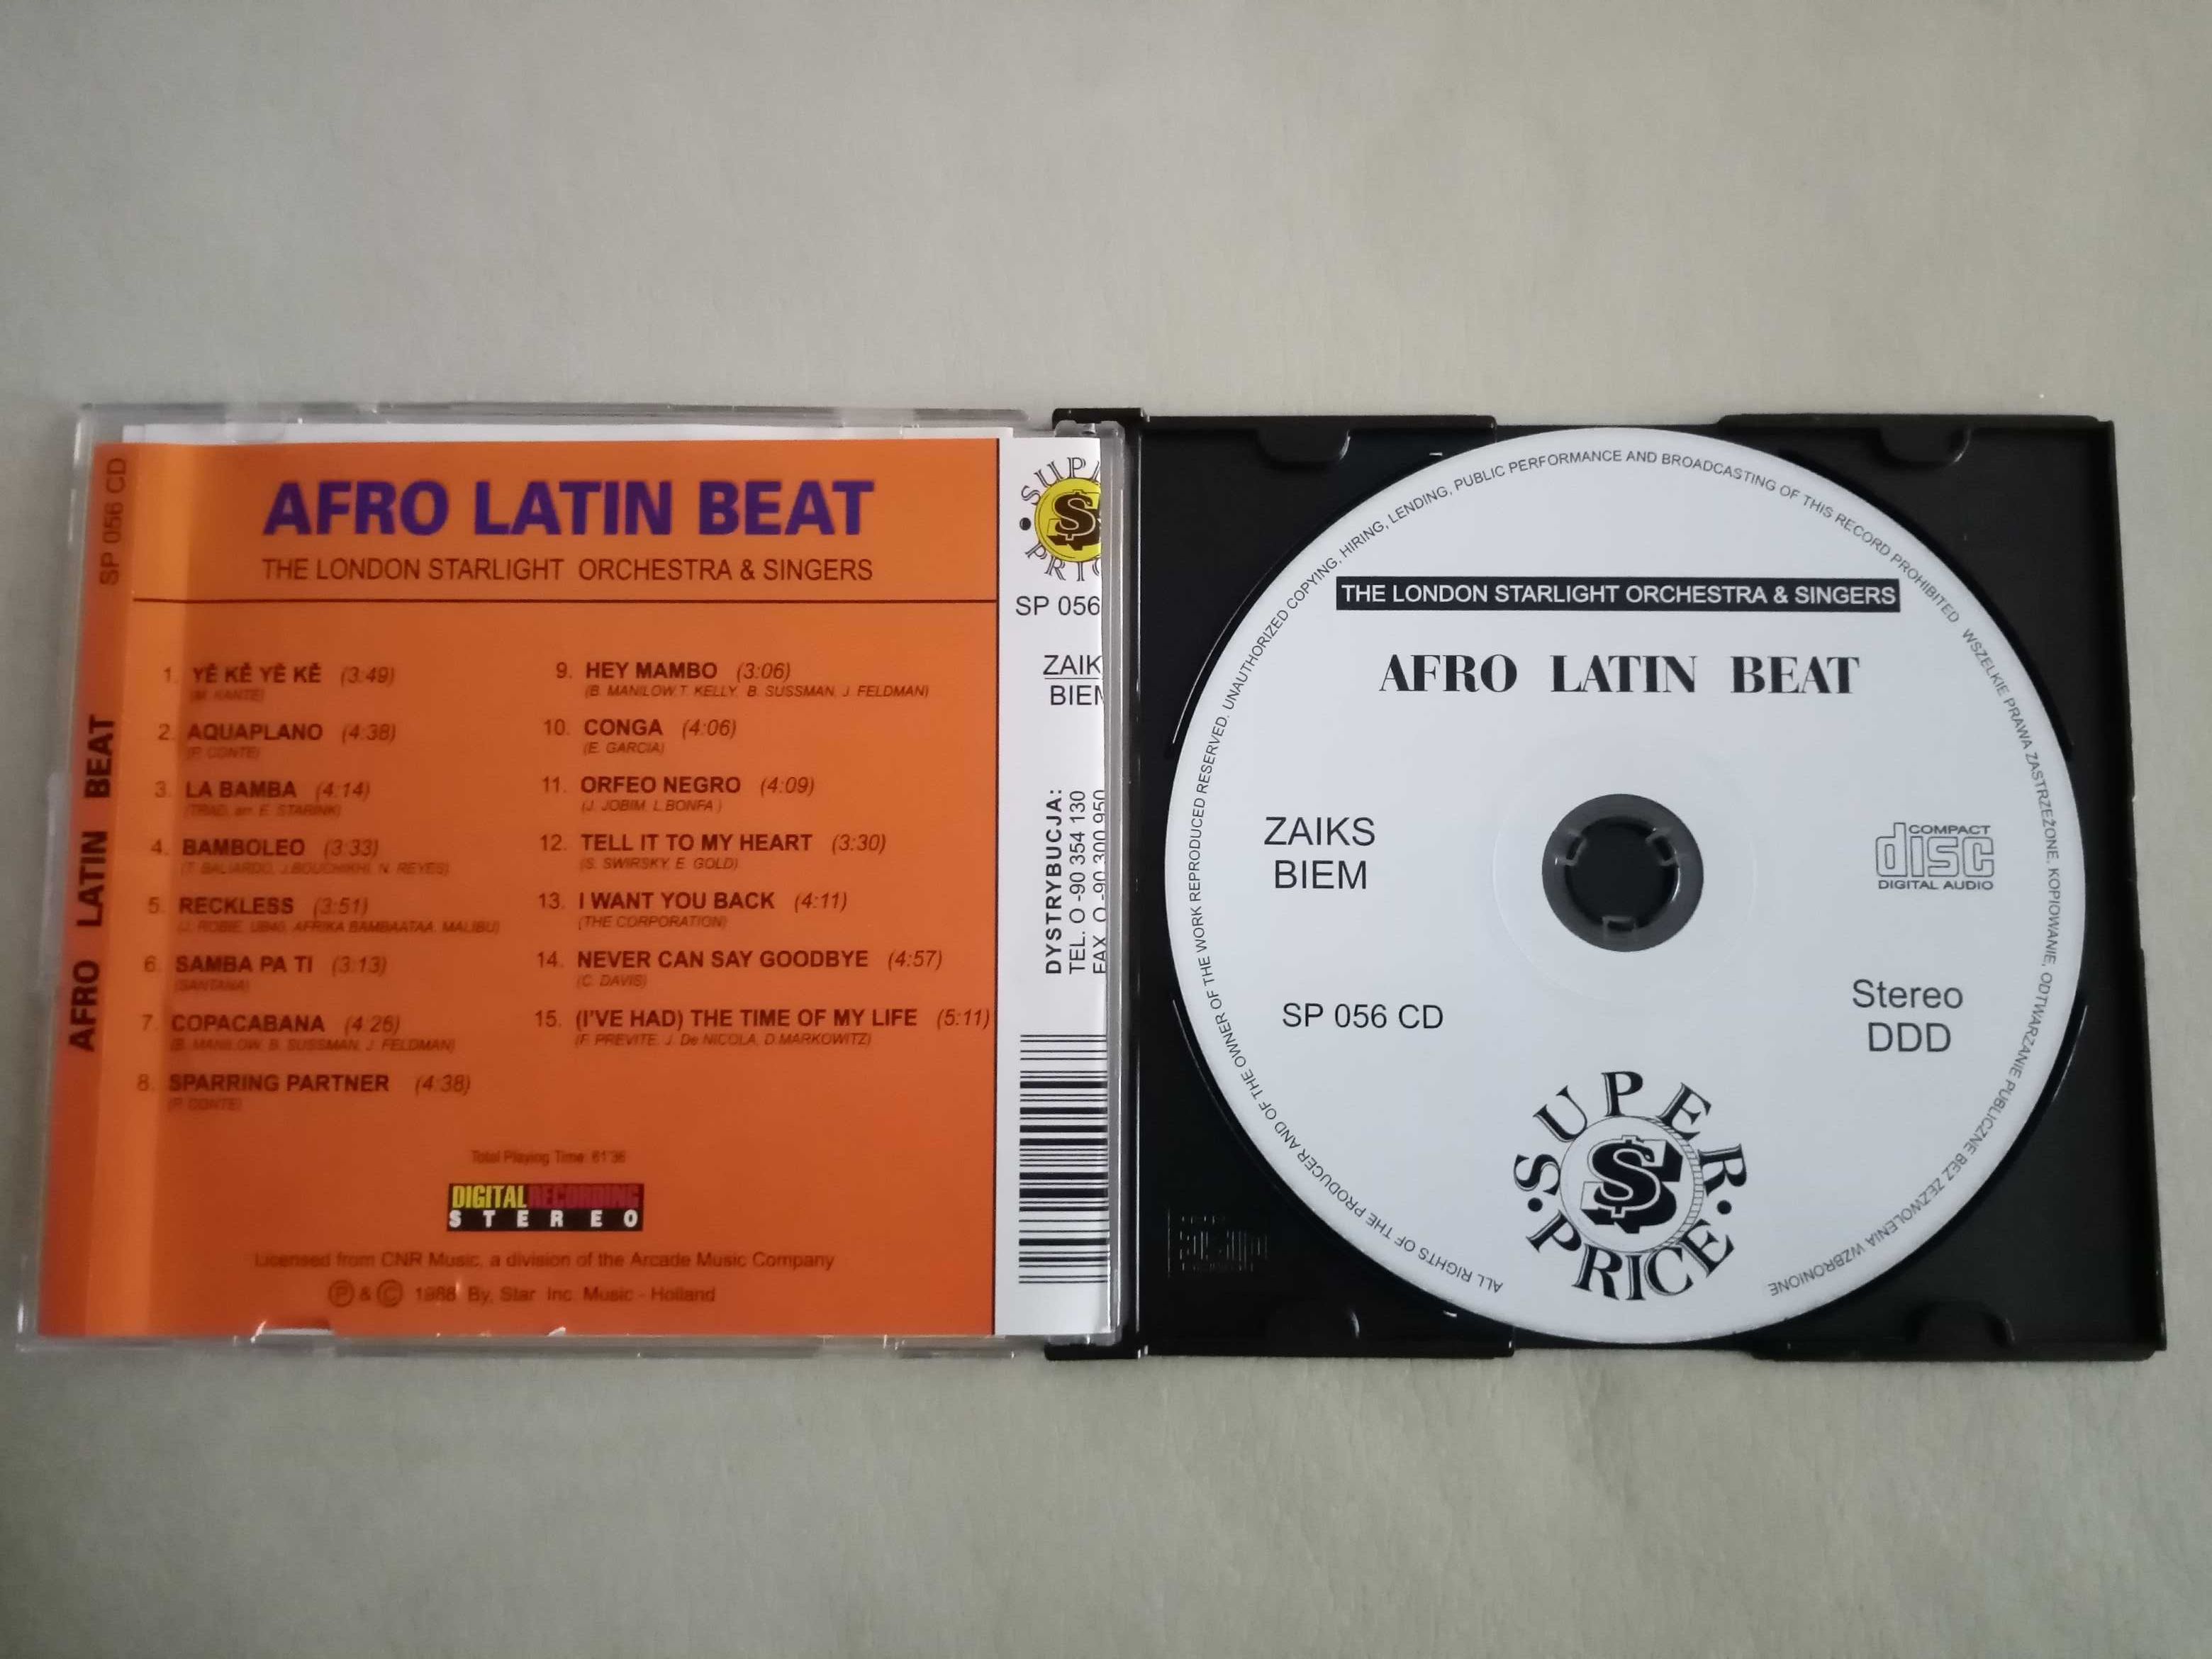 CD - Afro Latin Beat - The London Starlight Orchestra & Singers. 1988,